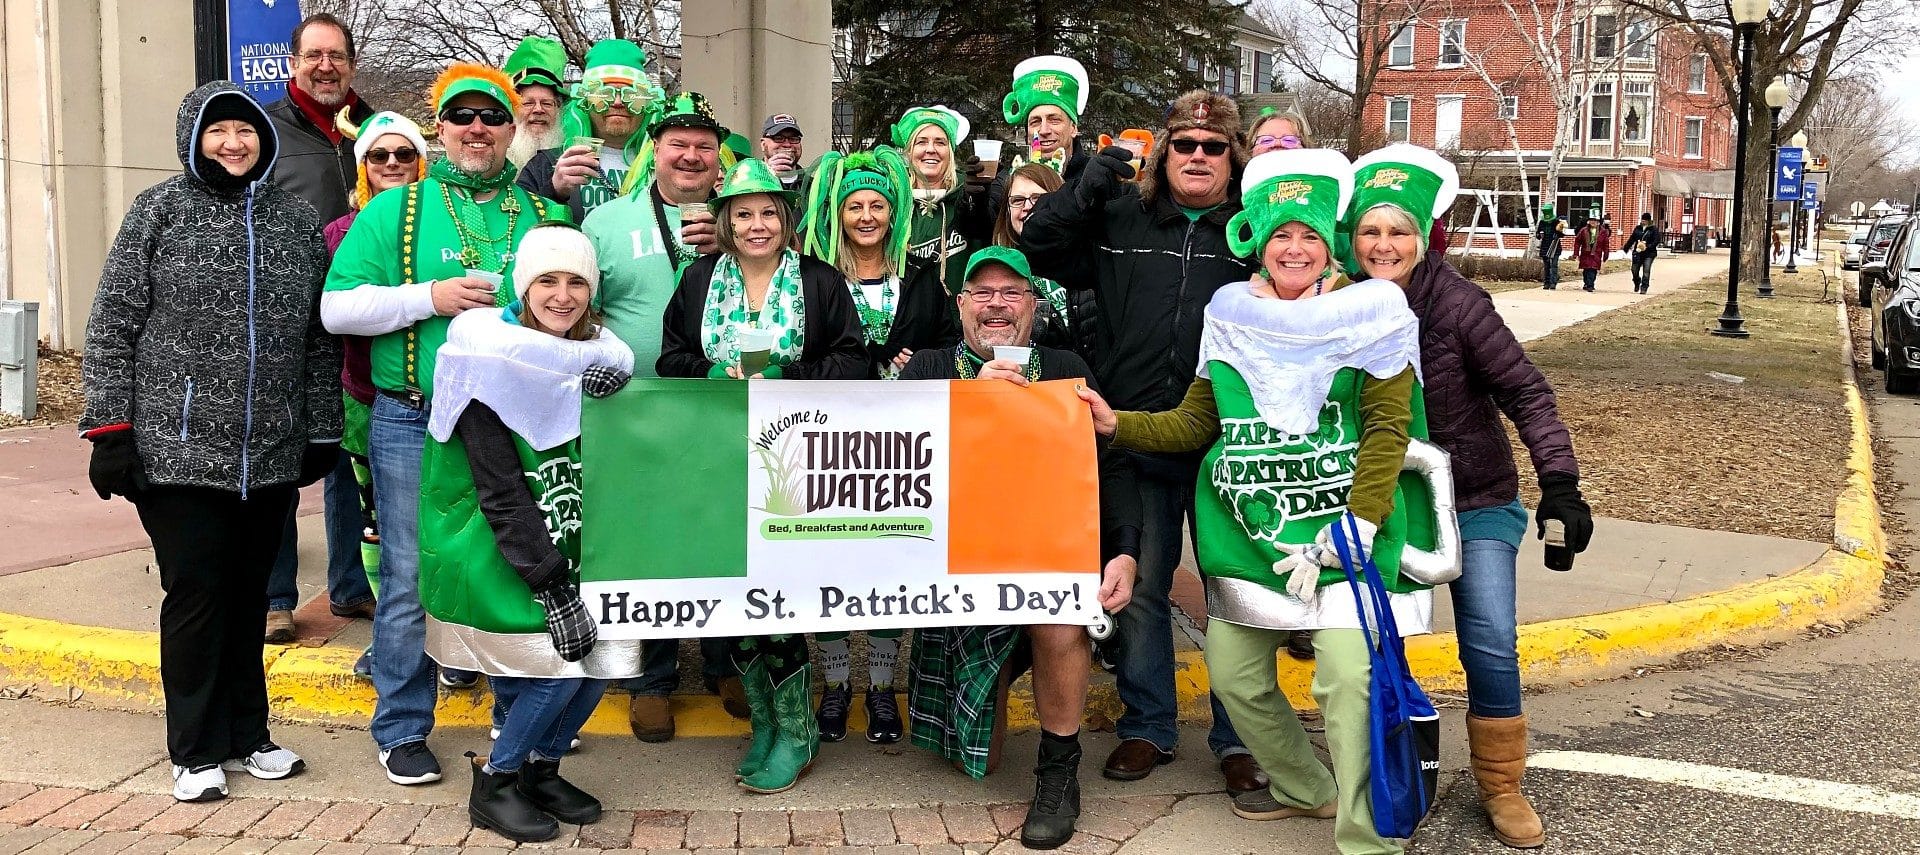 A group of people dressed in green for a St. Patrick's Day parade holding a sign